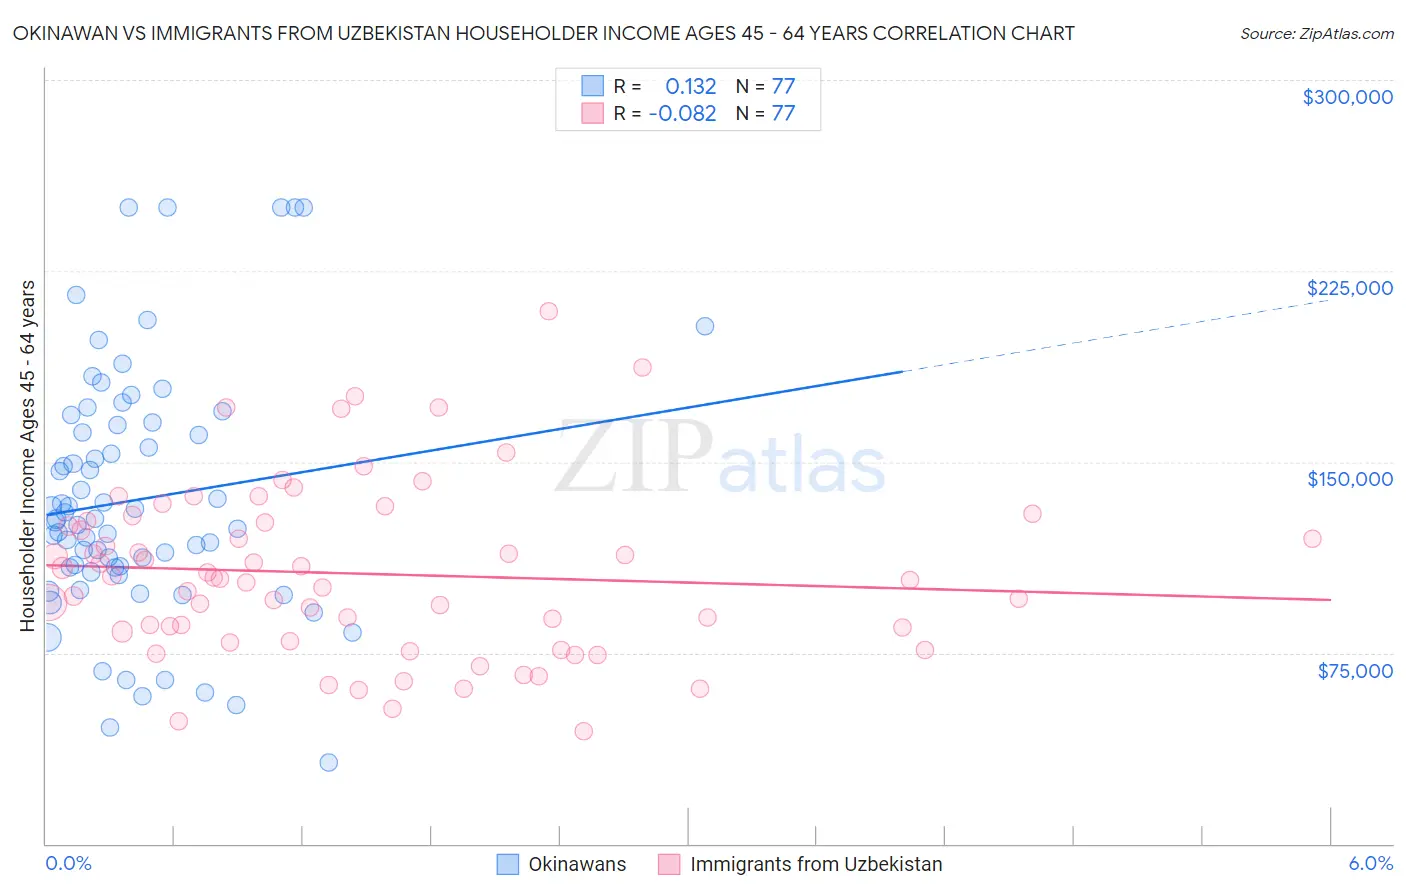 Okinawan vs Immigrants from Uzbekistan Householder Income Ages 45 - 64 years